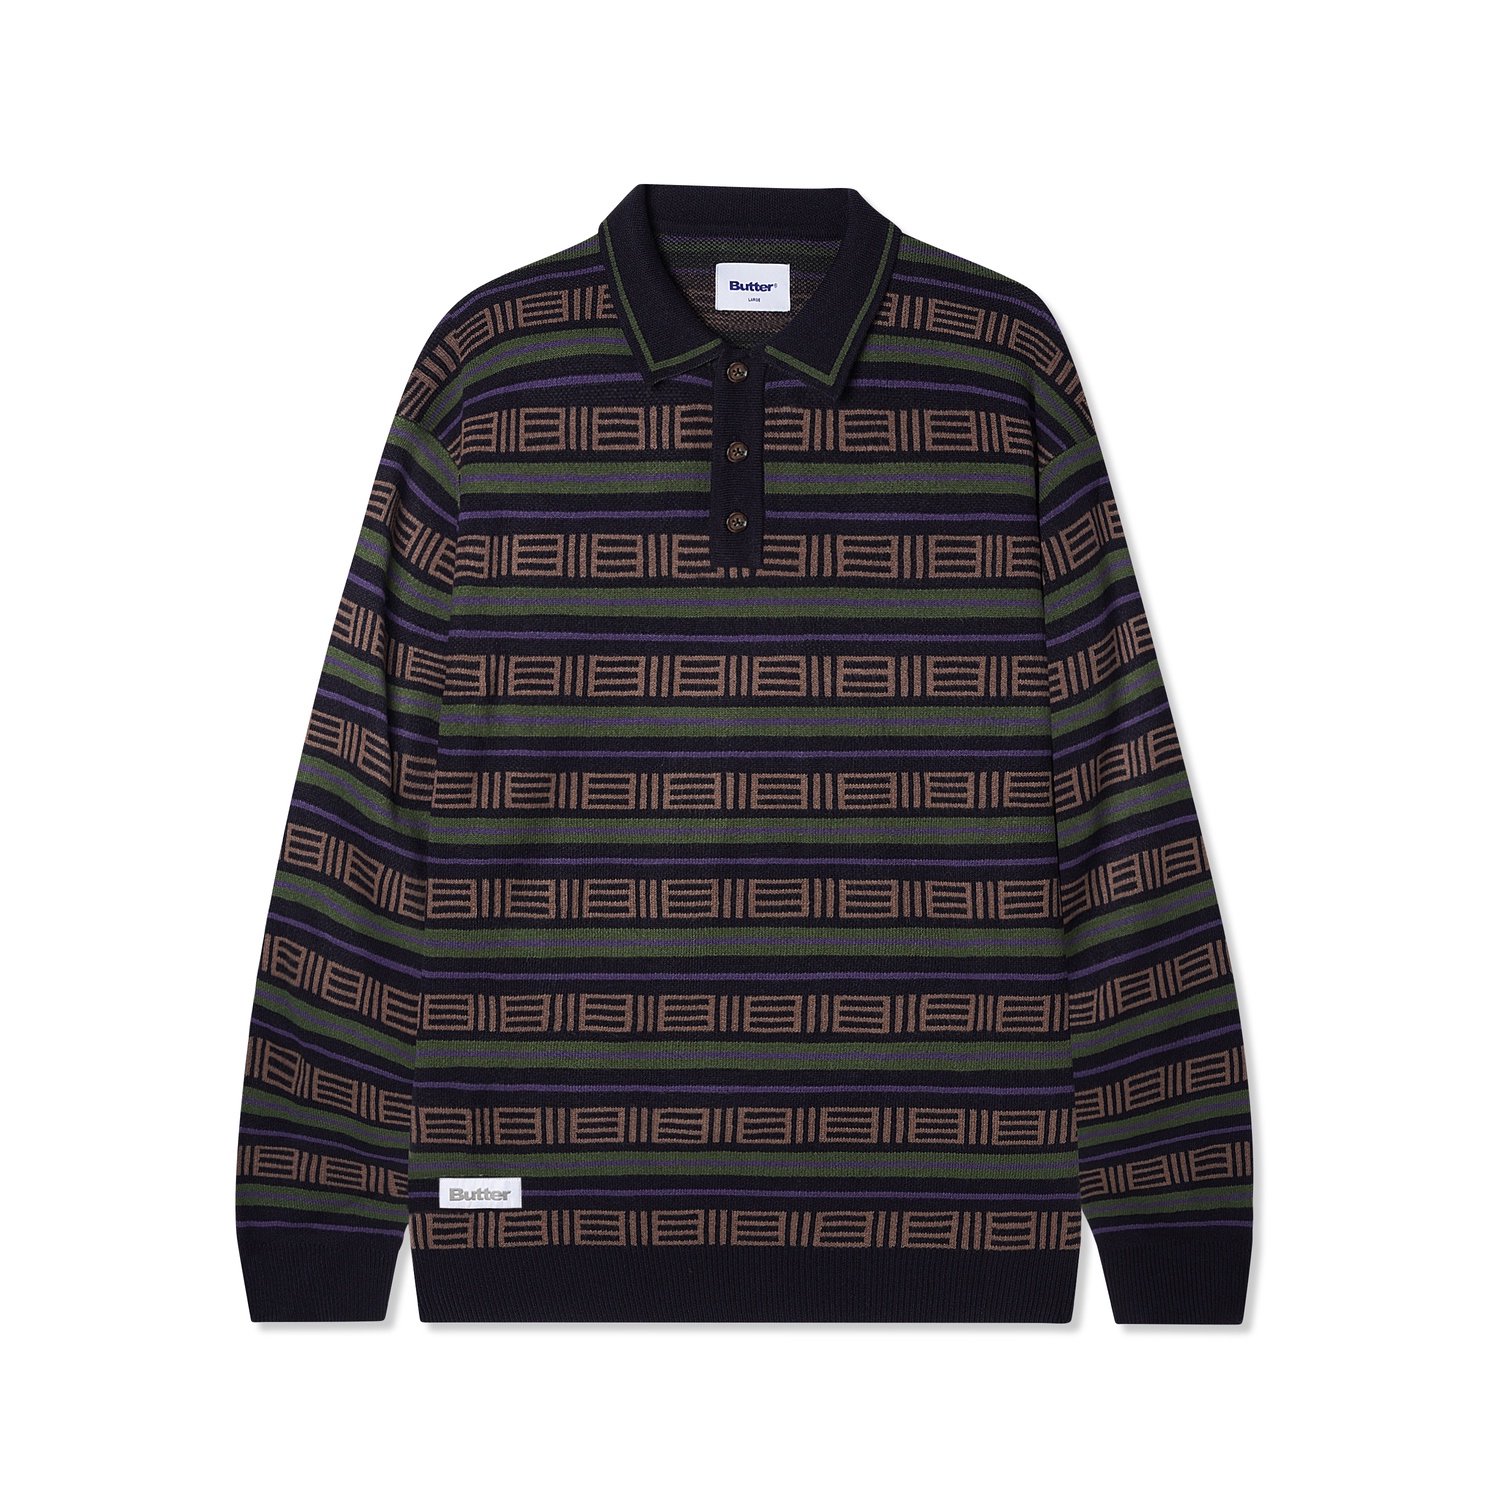 BUTTER GOODS<br>Windsor Knitted Sweater<br>